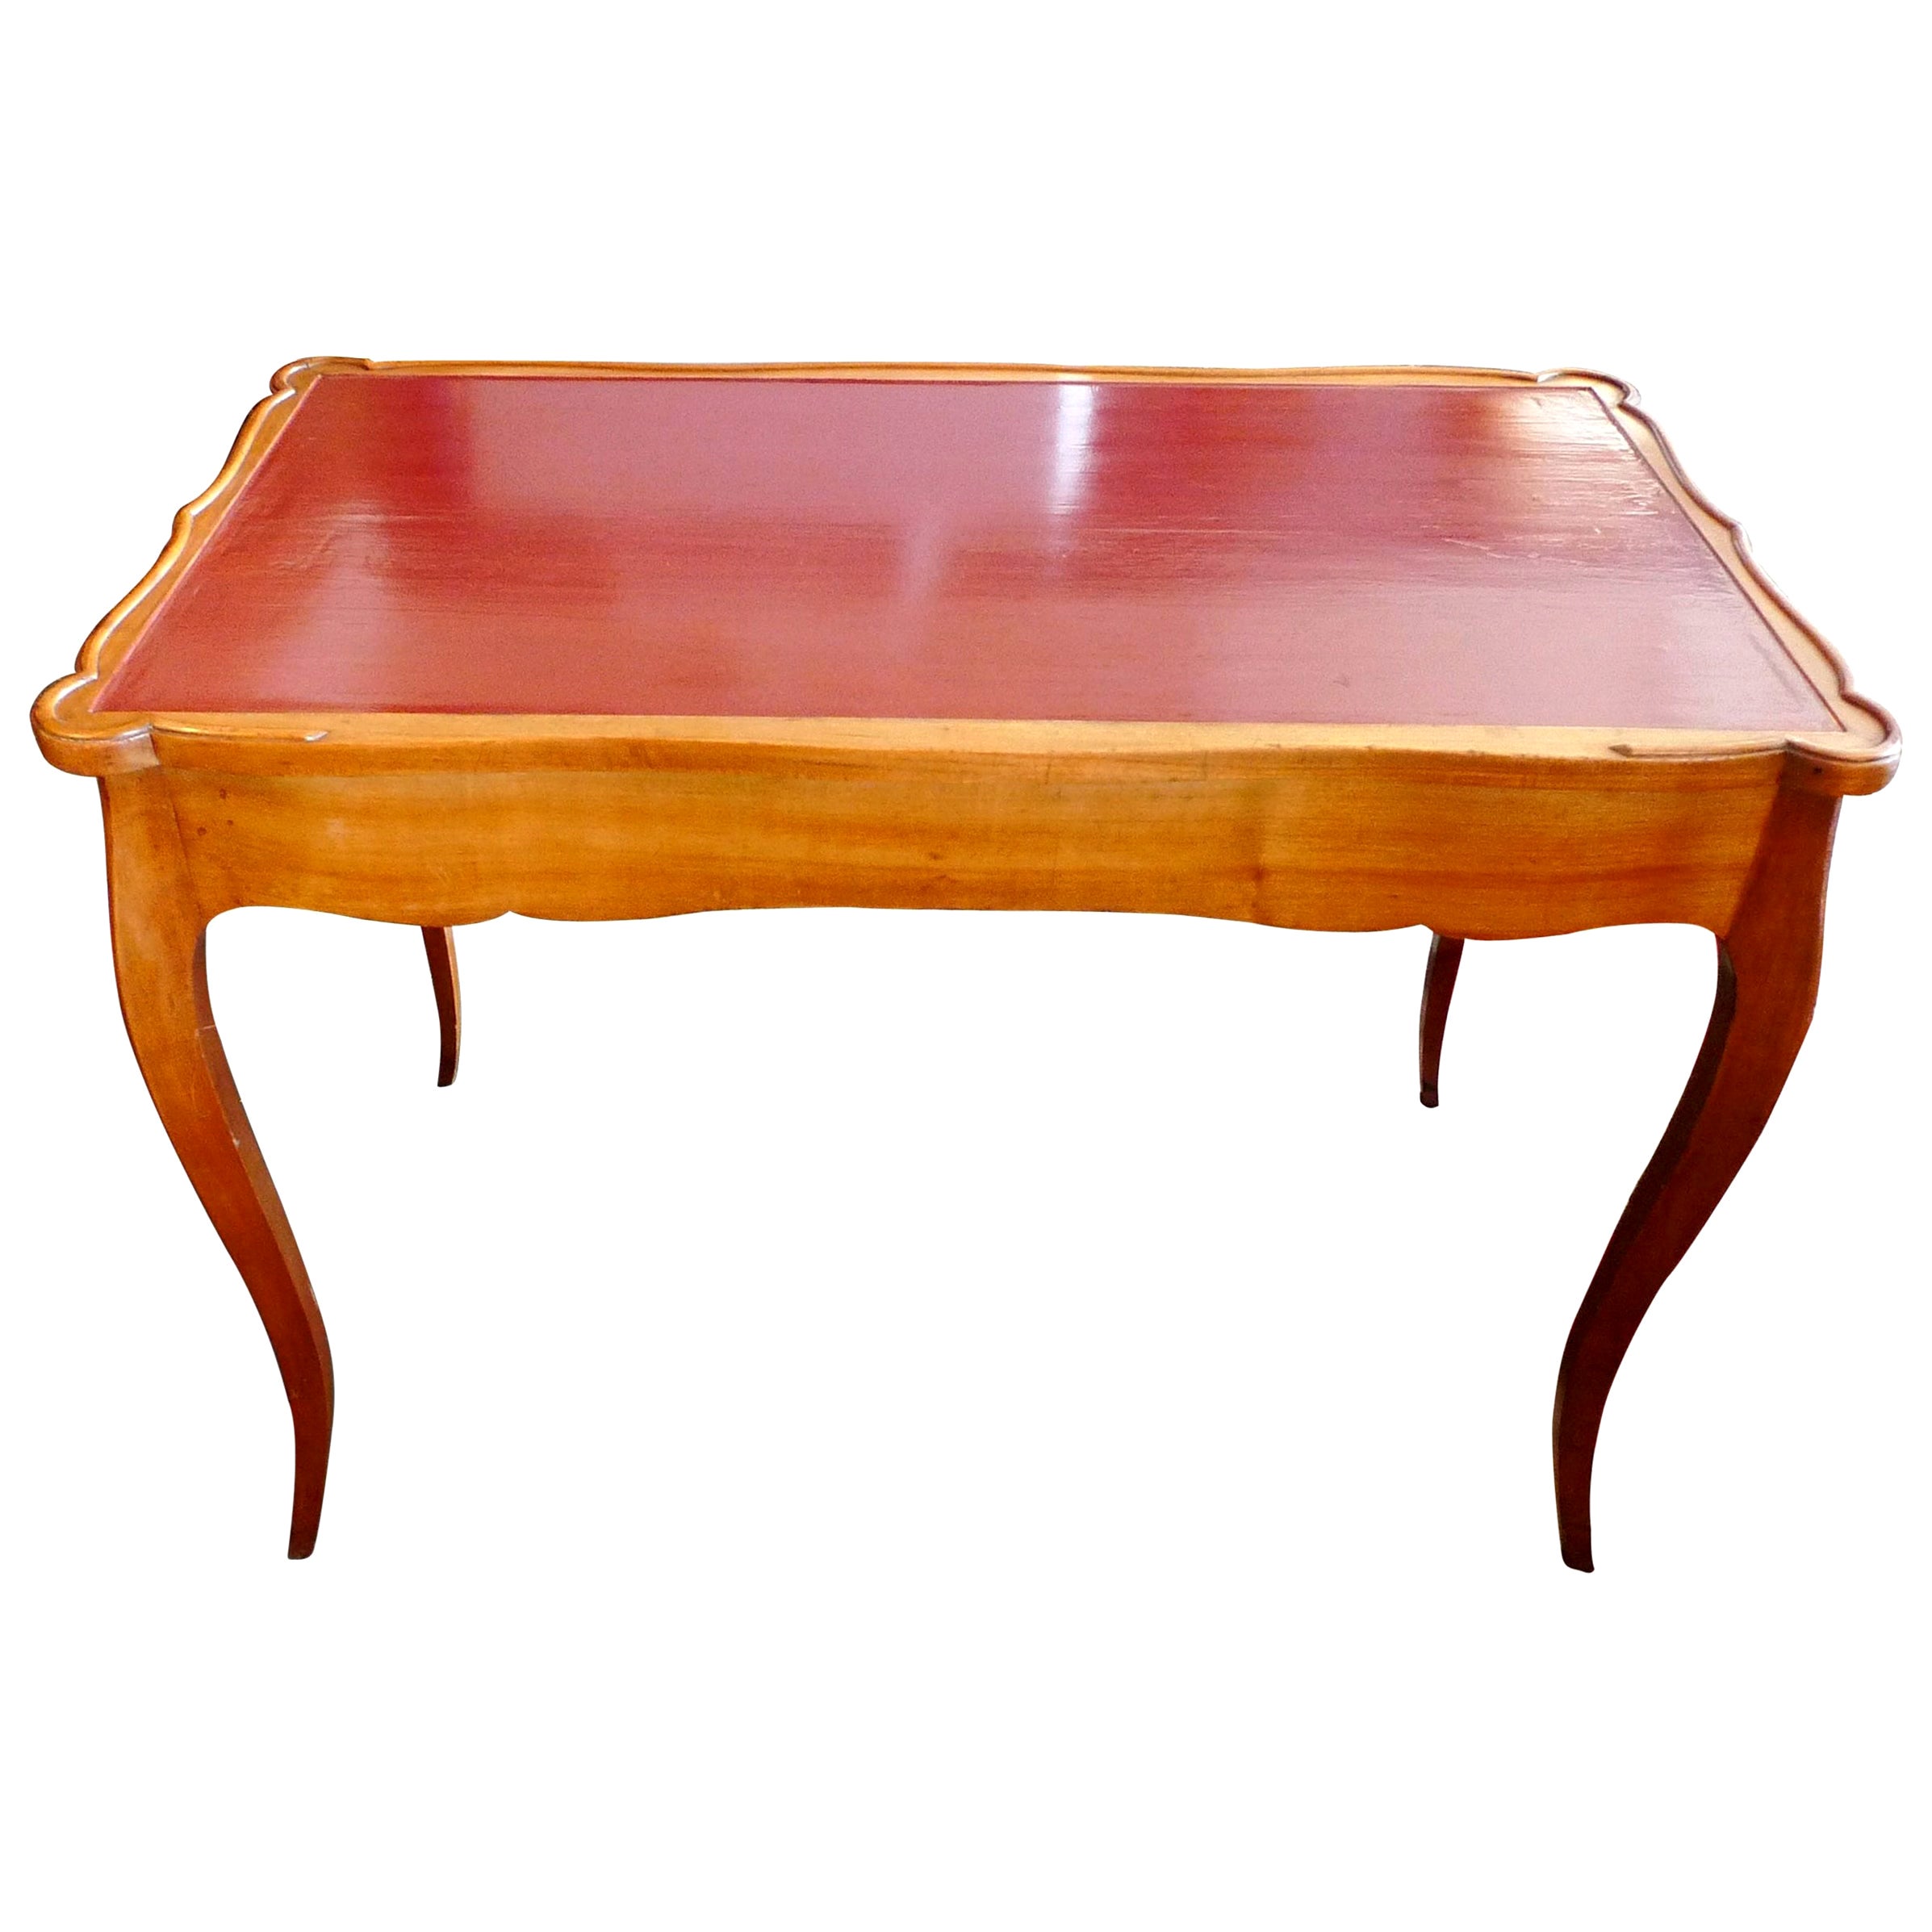 Early Qing Dynasty Drawing Table at 1stDibs